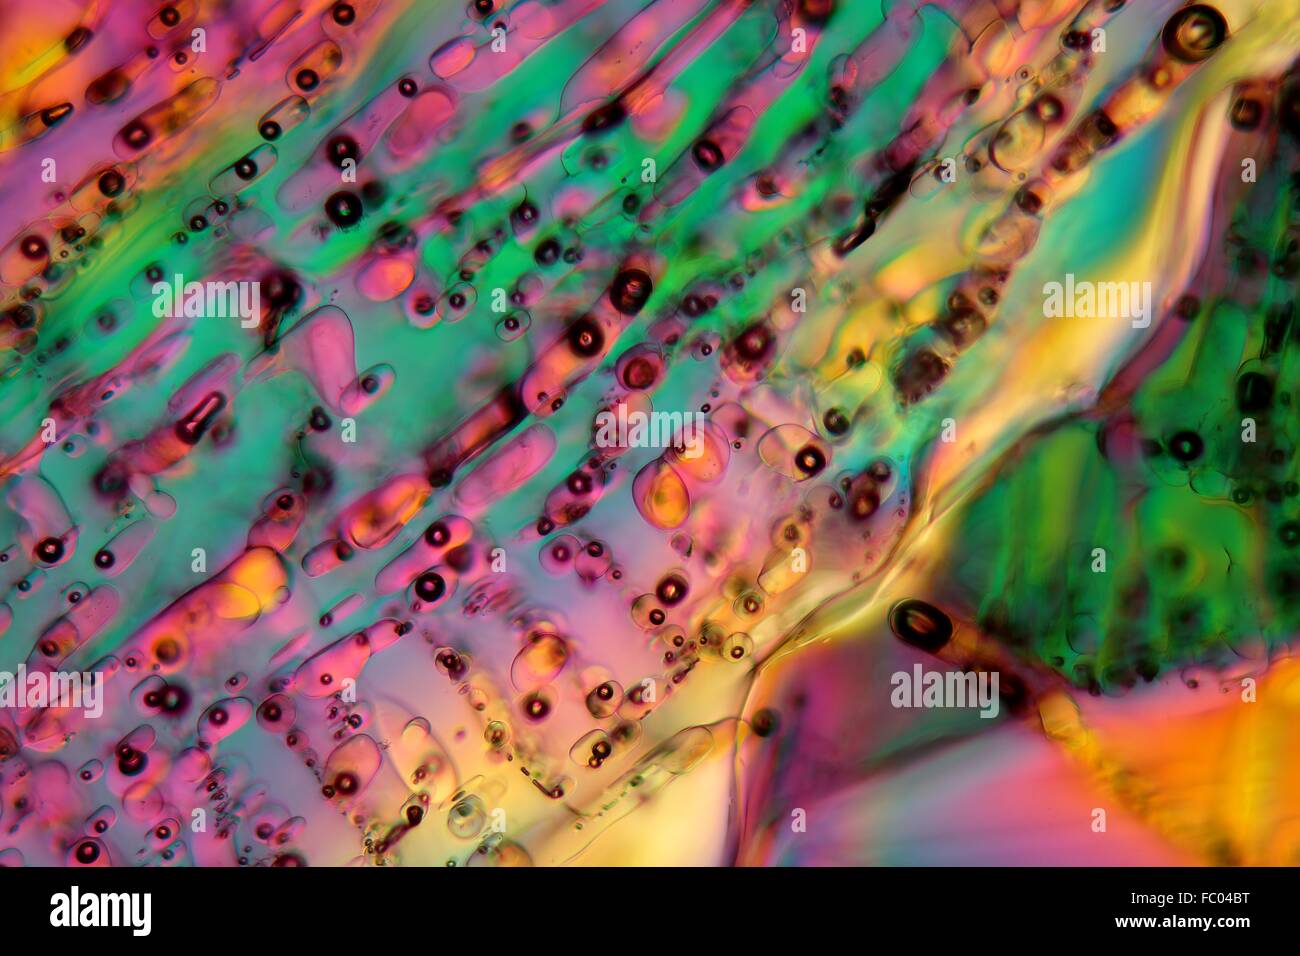 Ice crystals under the microscope. Stock Photo